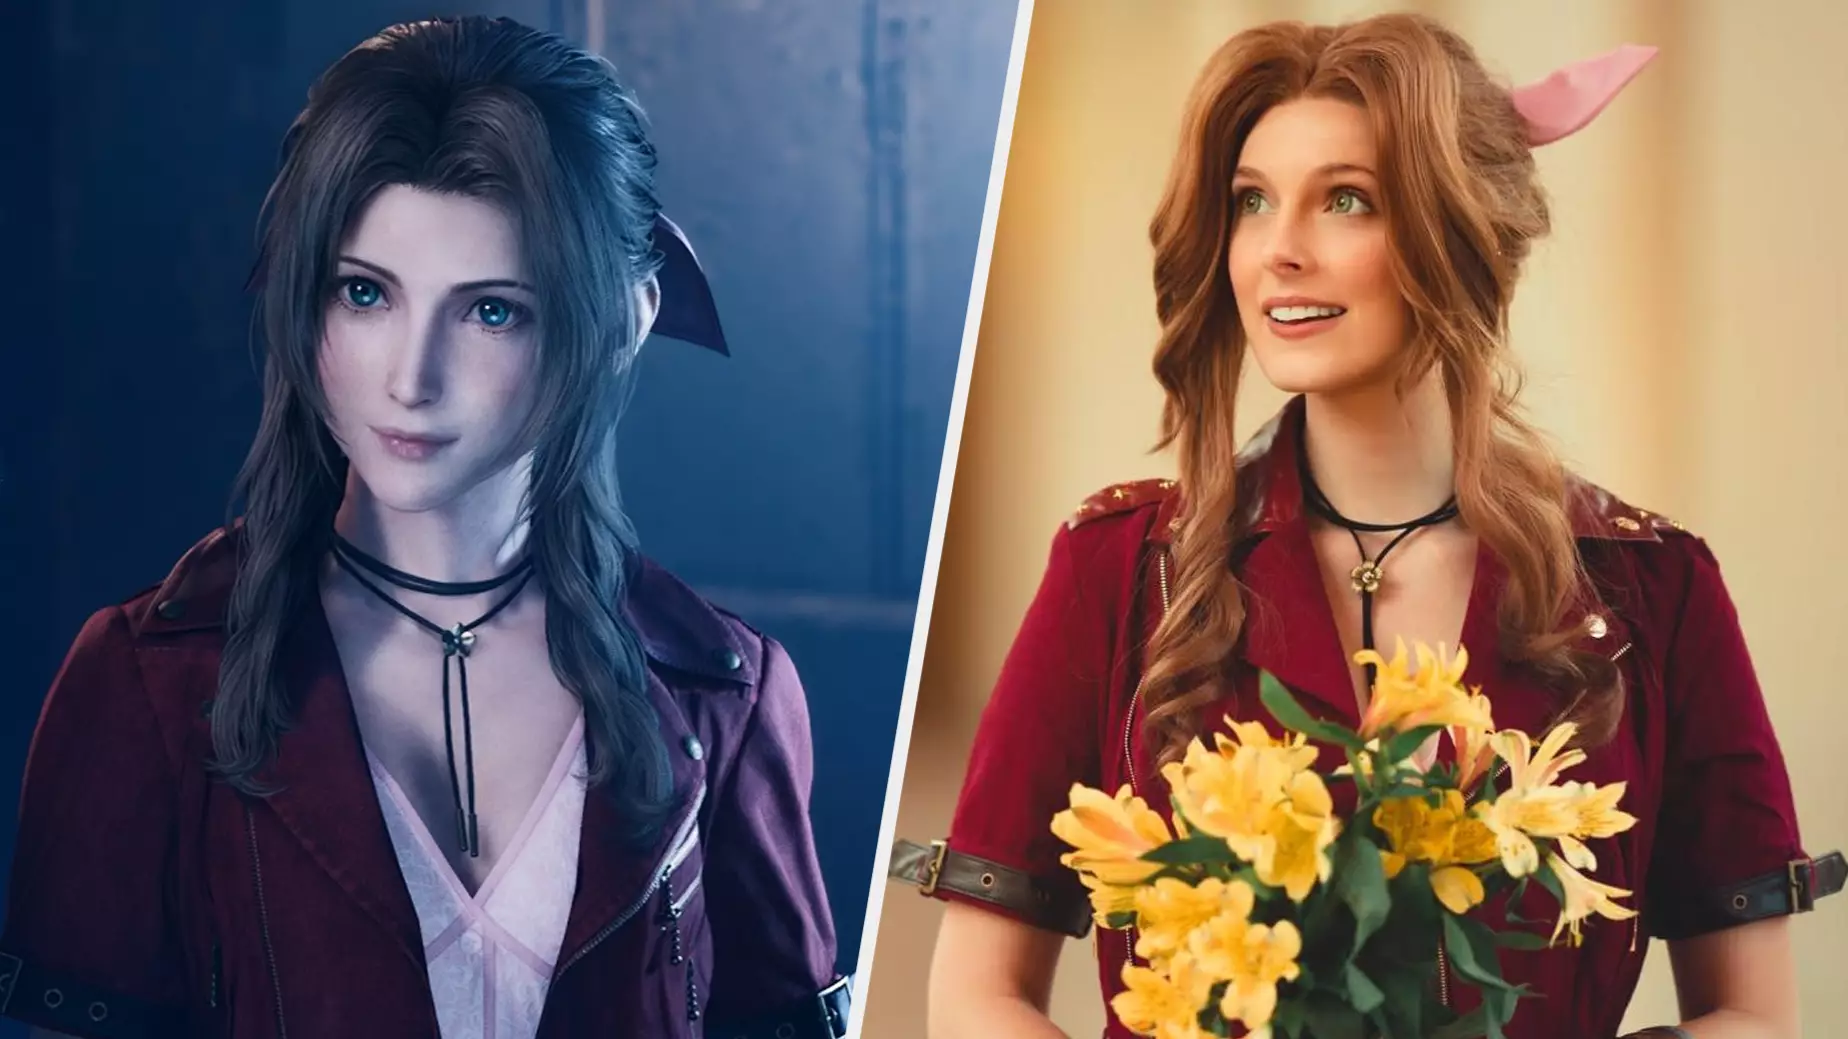 'Final Fantasy VII Remake' Actor Cosplaying As Her Character Is Wholesome AF